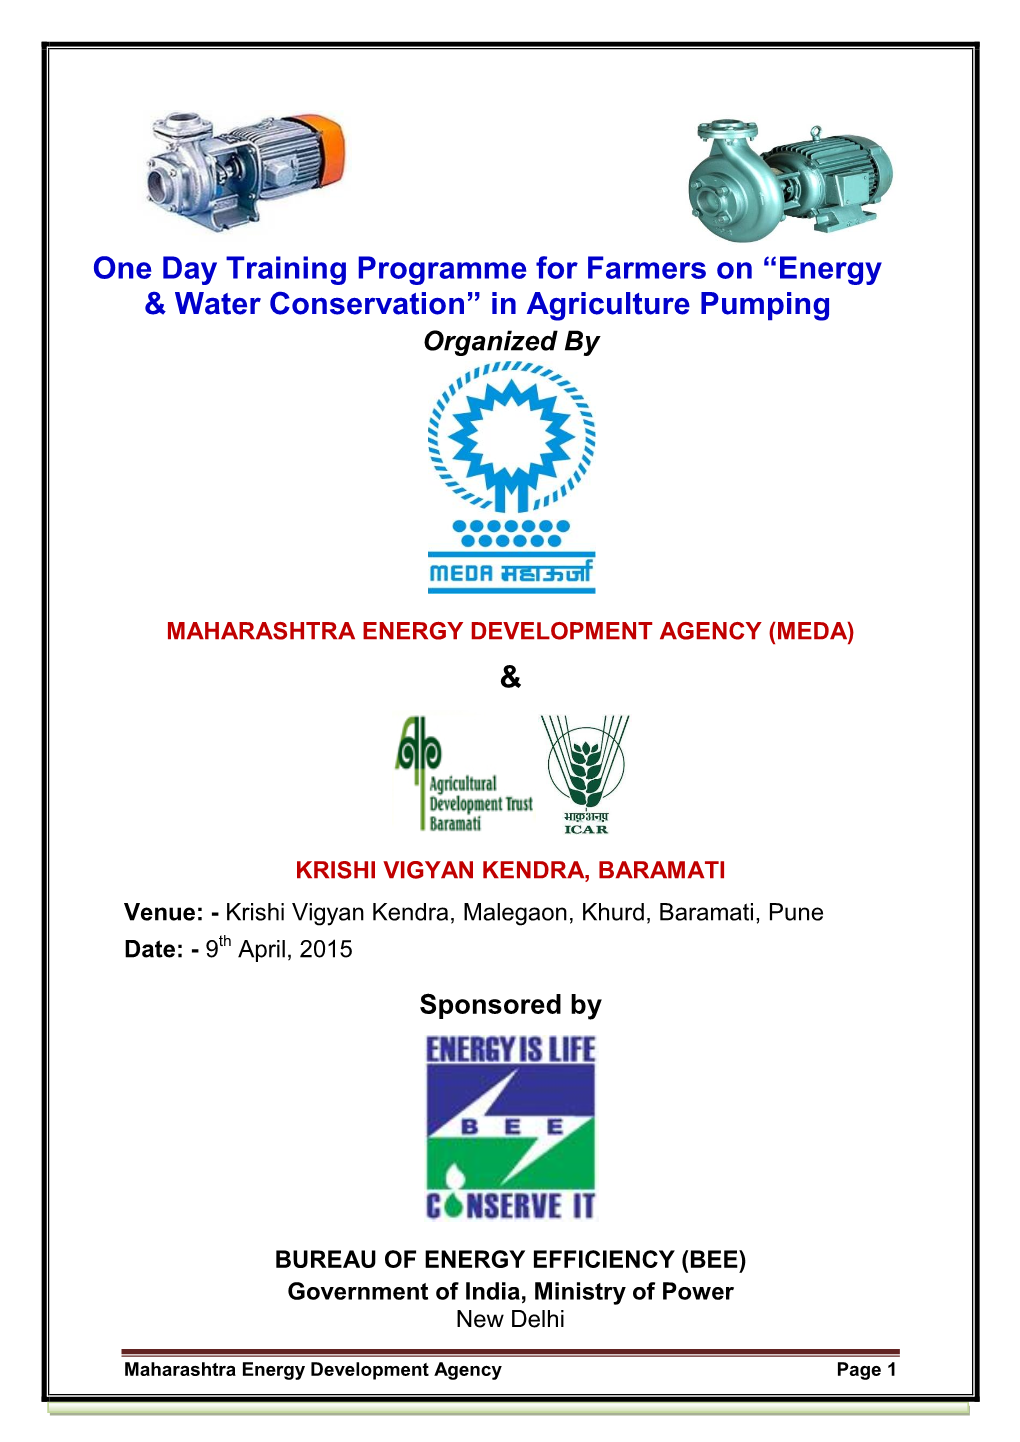 One Day Training Programme for Farmers on “Energy & Water Conservation” in Agriculture Pumping